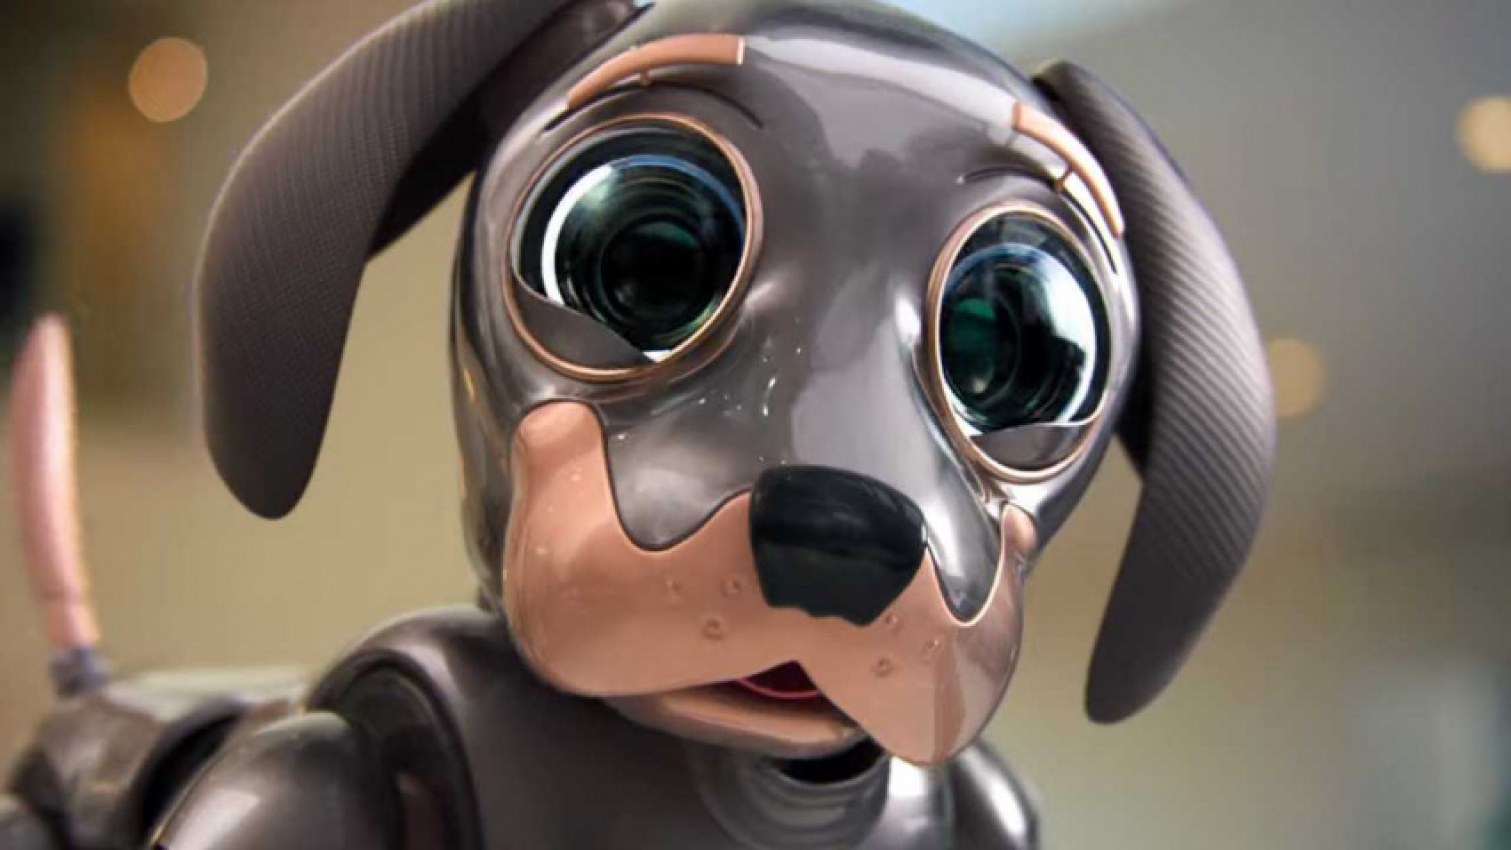 autos, cars, kia, kia super bowl teasers pull our heartstrings with wide-eyed robo dog